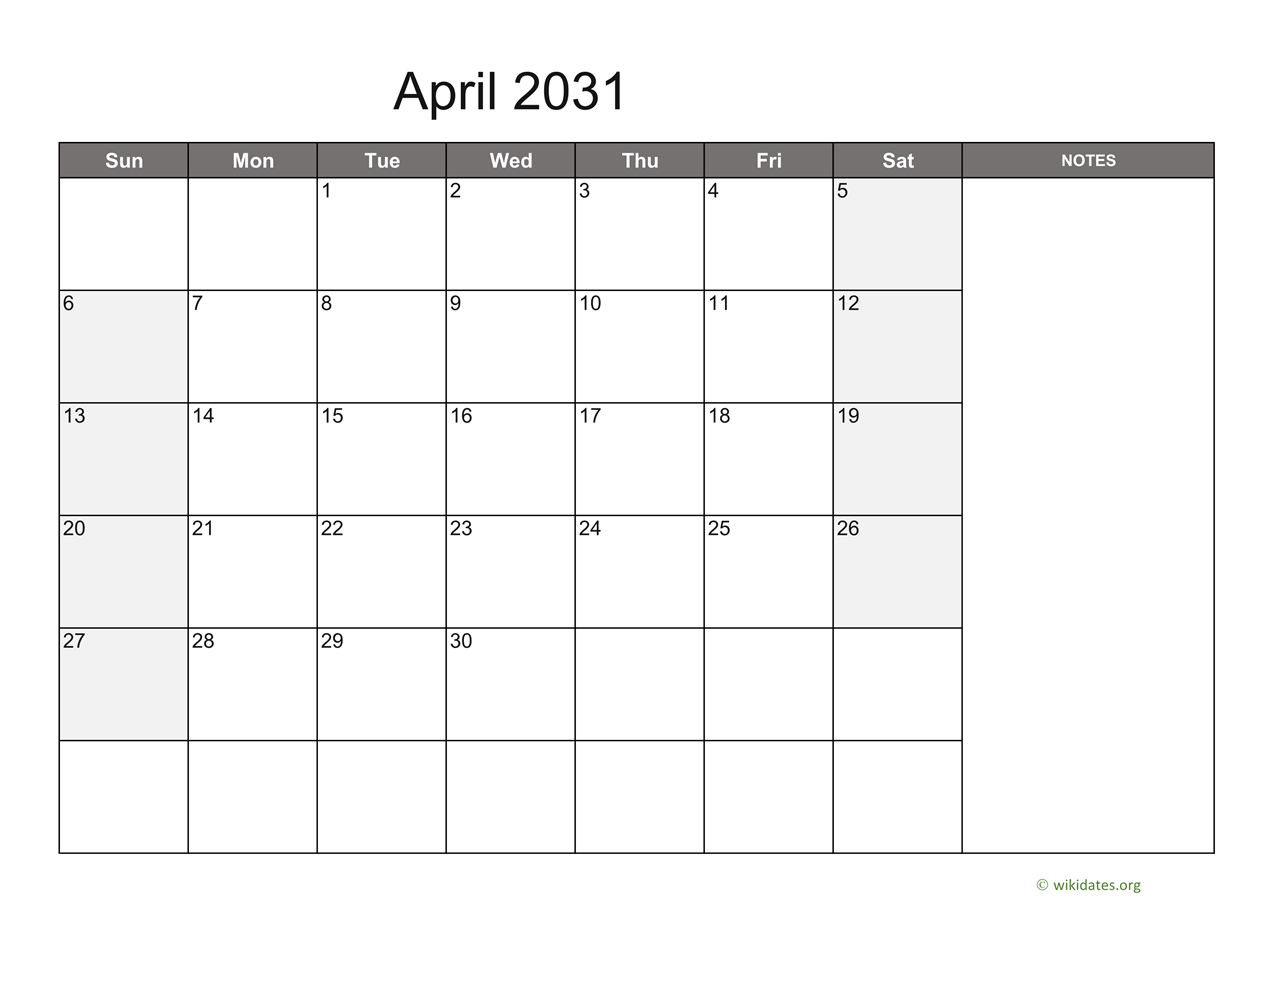 April 2031 Calendar with Notes | WikiDates.org